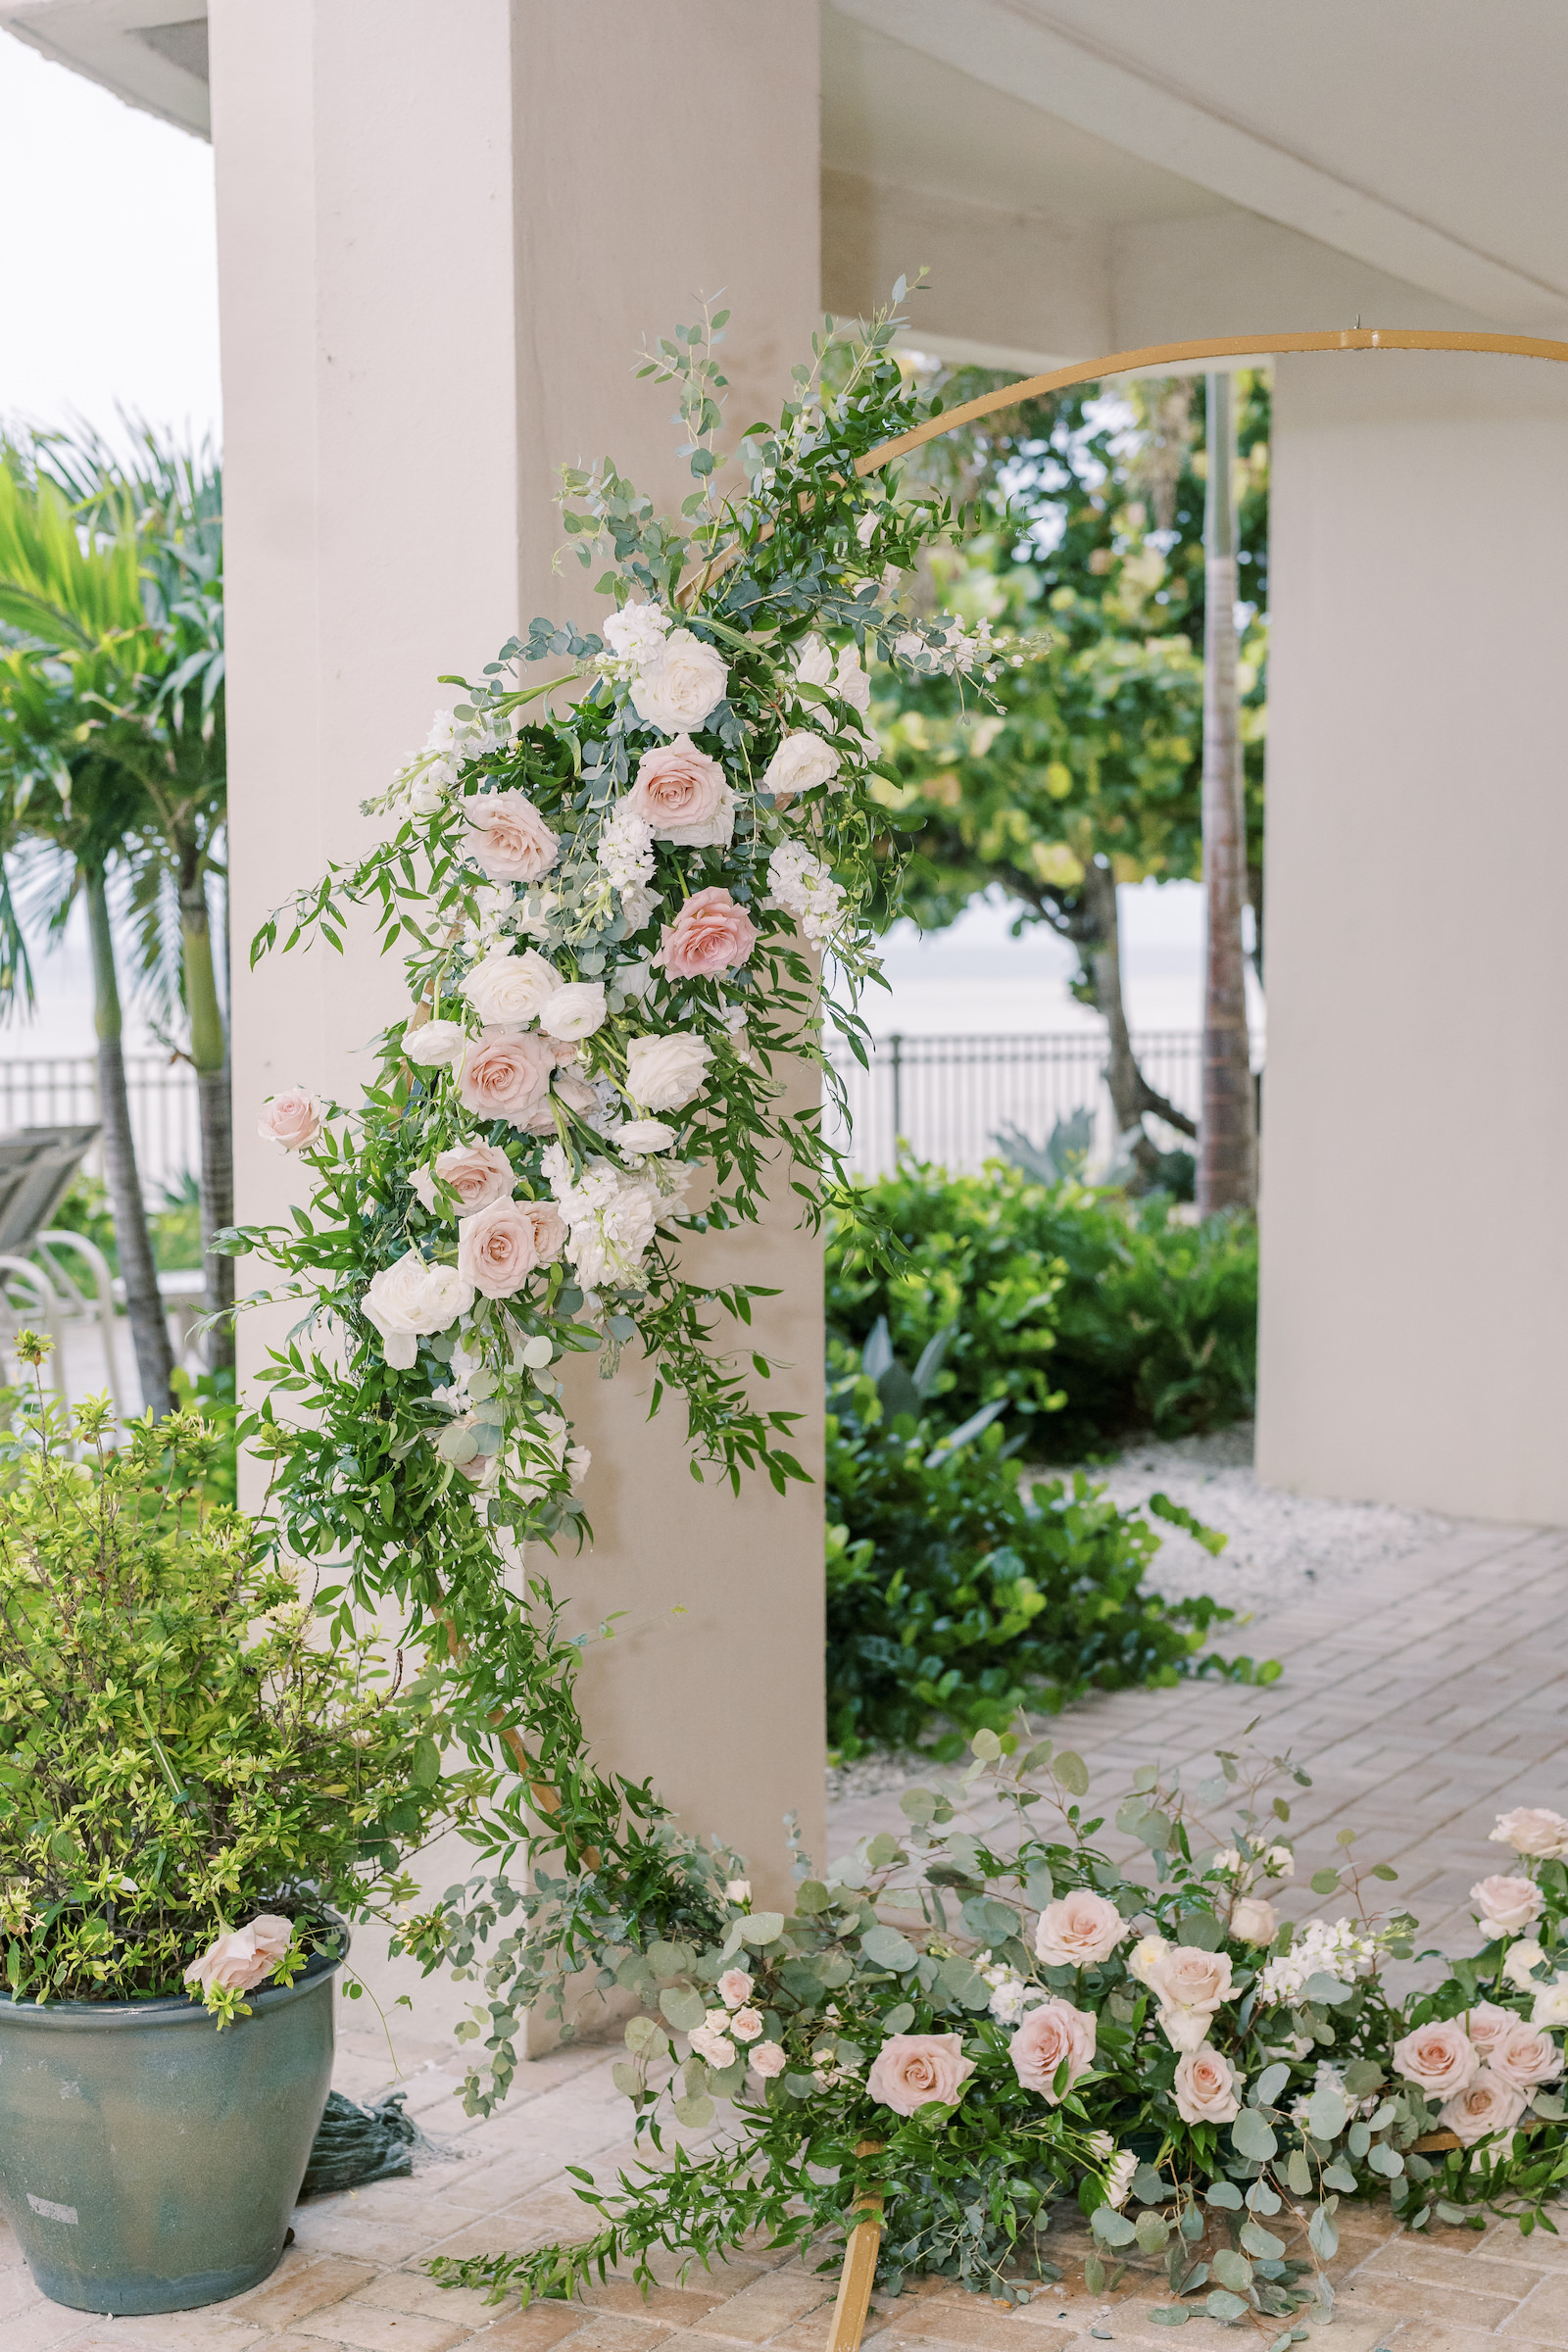 Blush Roses and White Ranunculus Floral Design Wedding Décor | Tampa Florida Wedding Planner MDP Events Planning